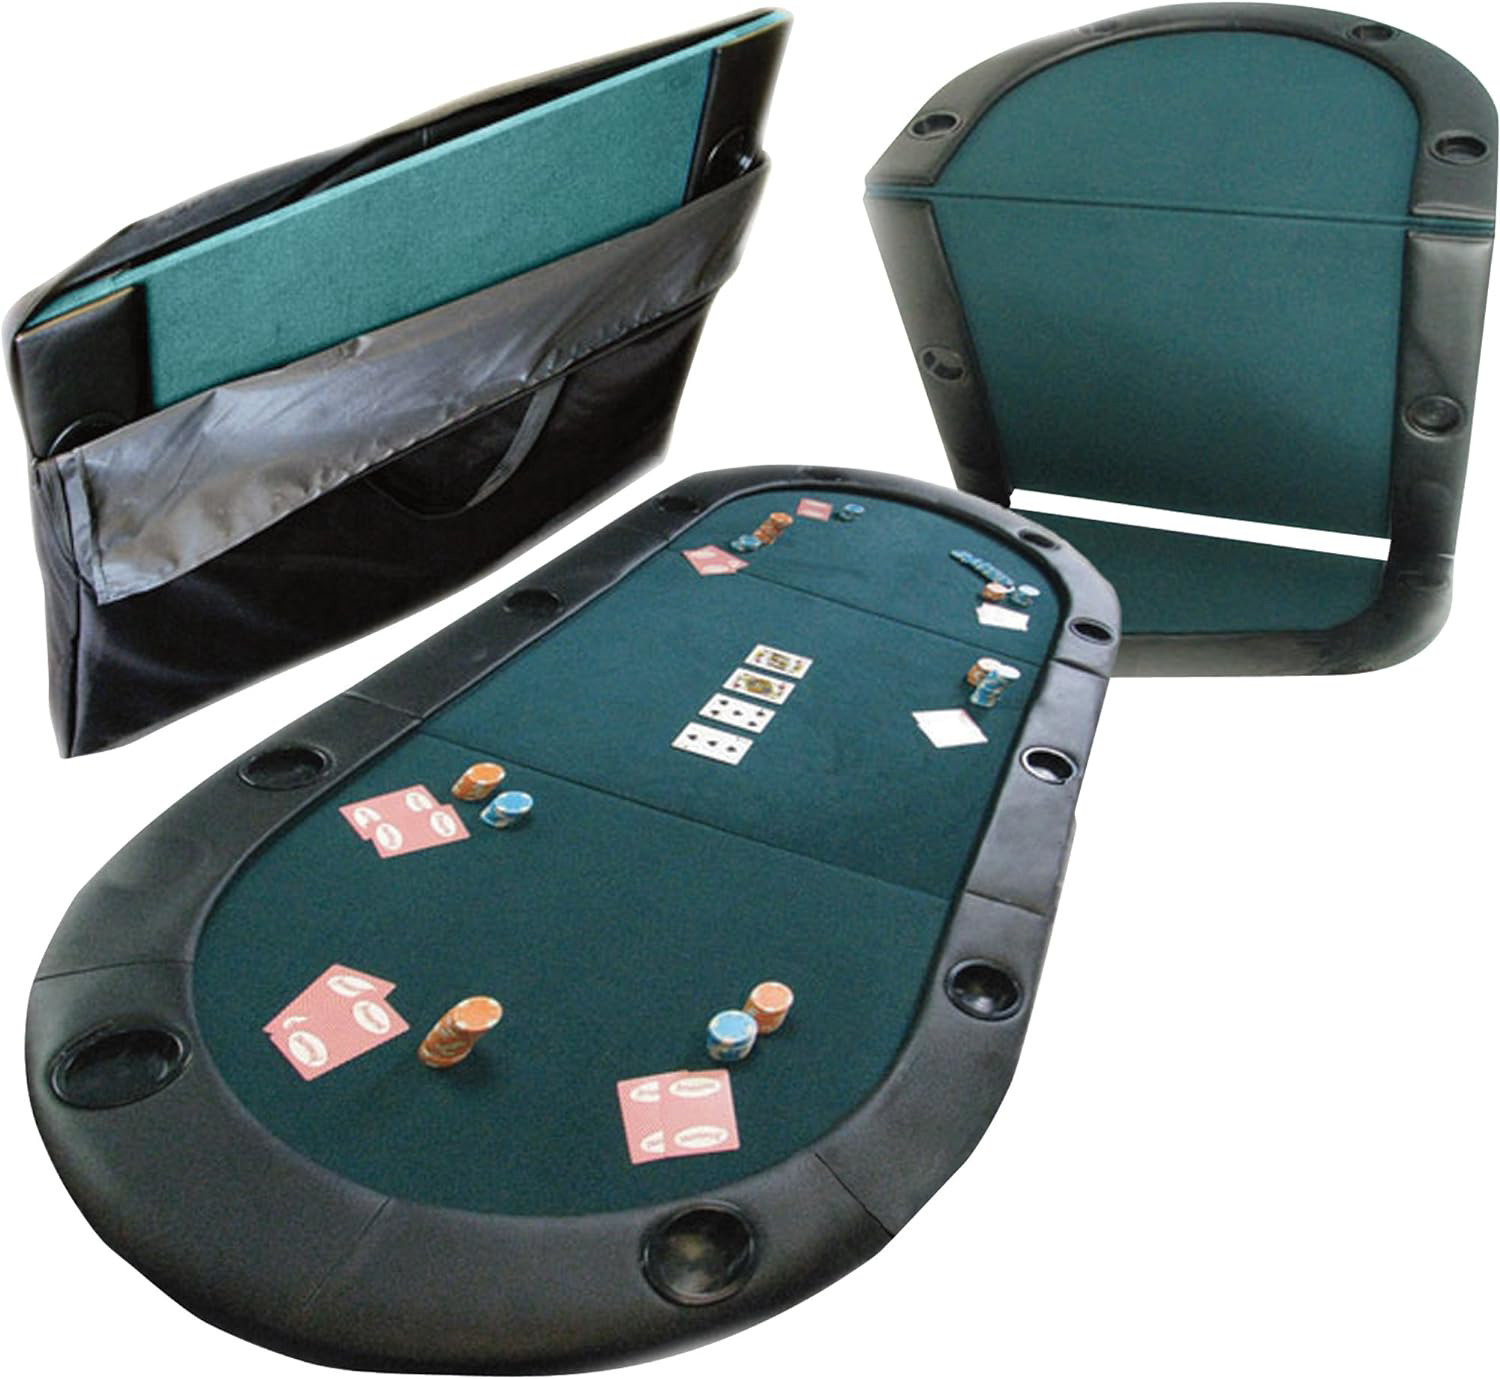 Trademark Texas Hold\'em Poker Padded Table Top with Cupholders,Green